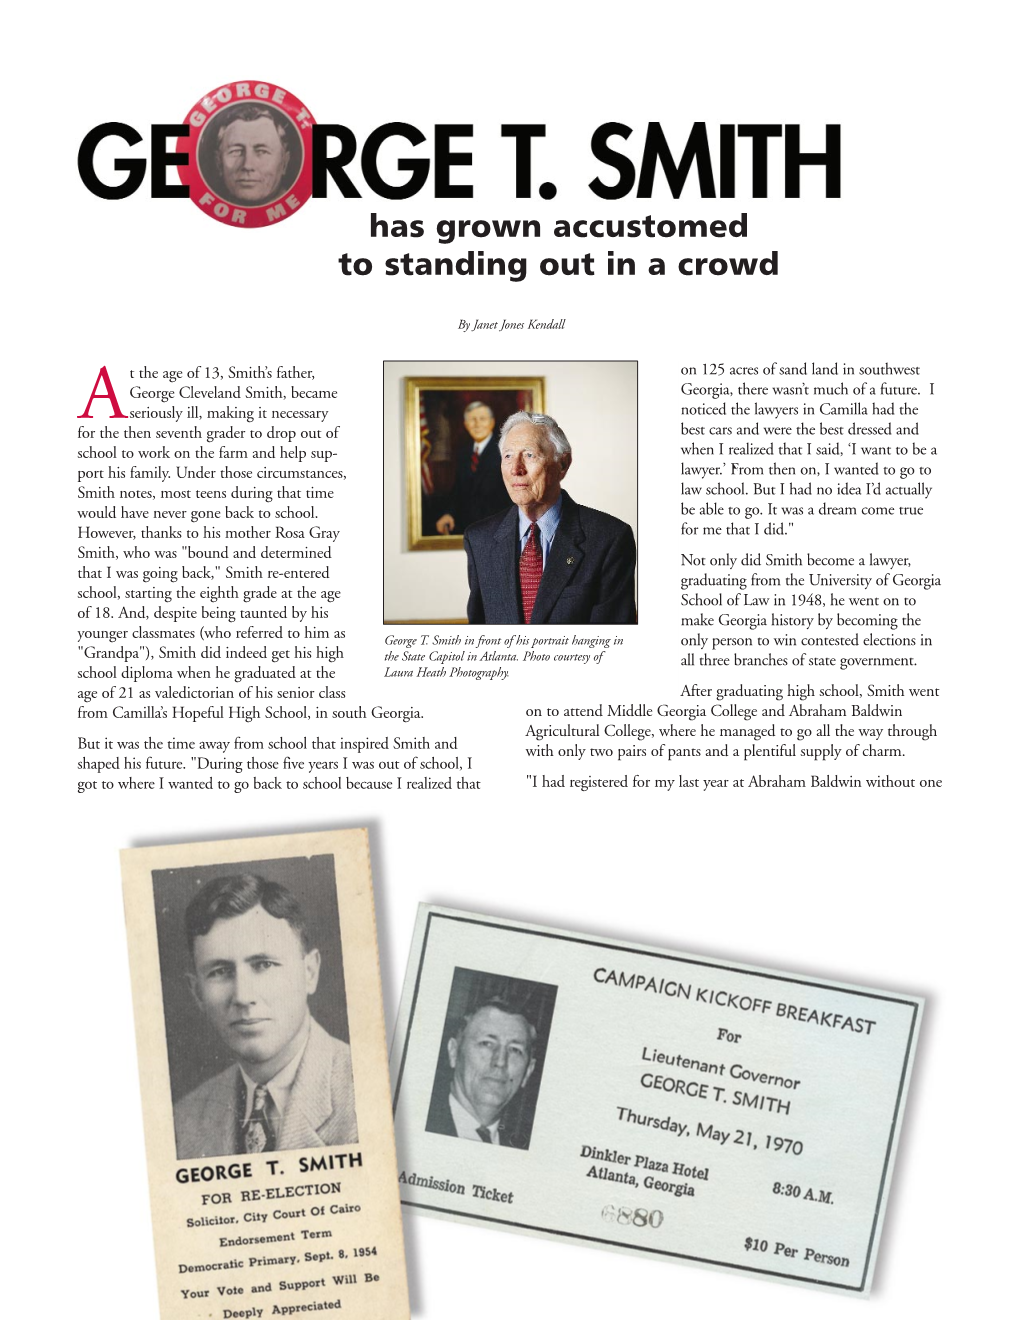 George T. Smith Has Grown Accustomed to Standing out in A